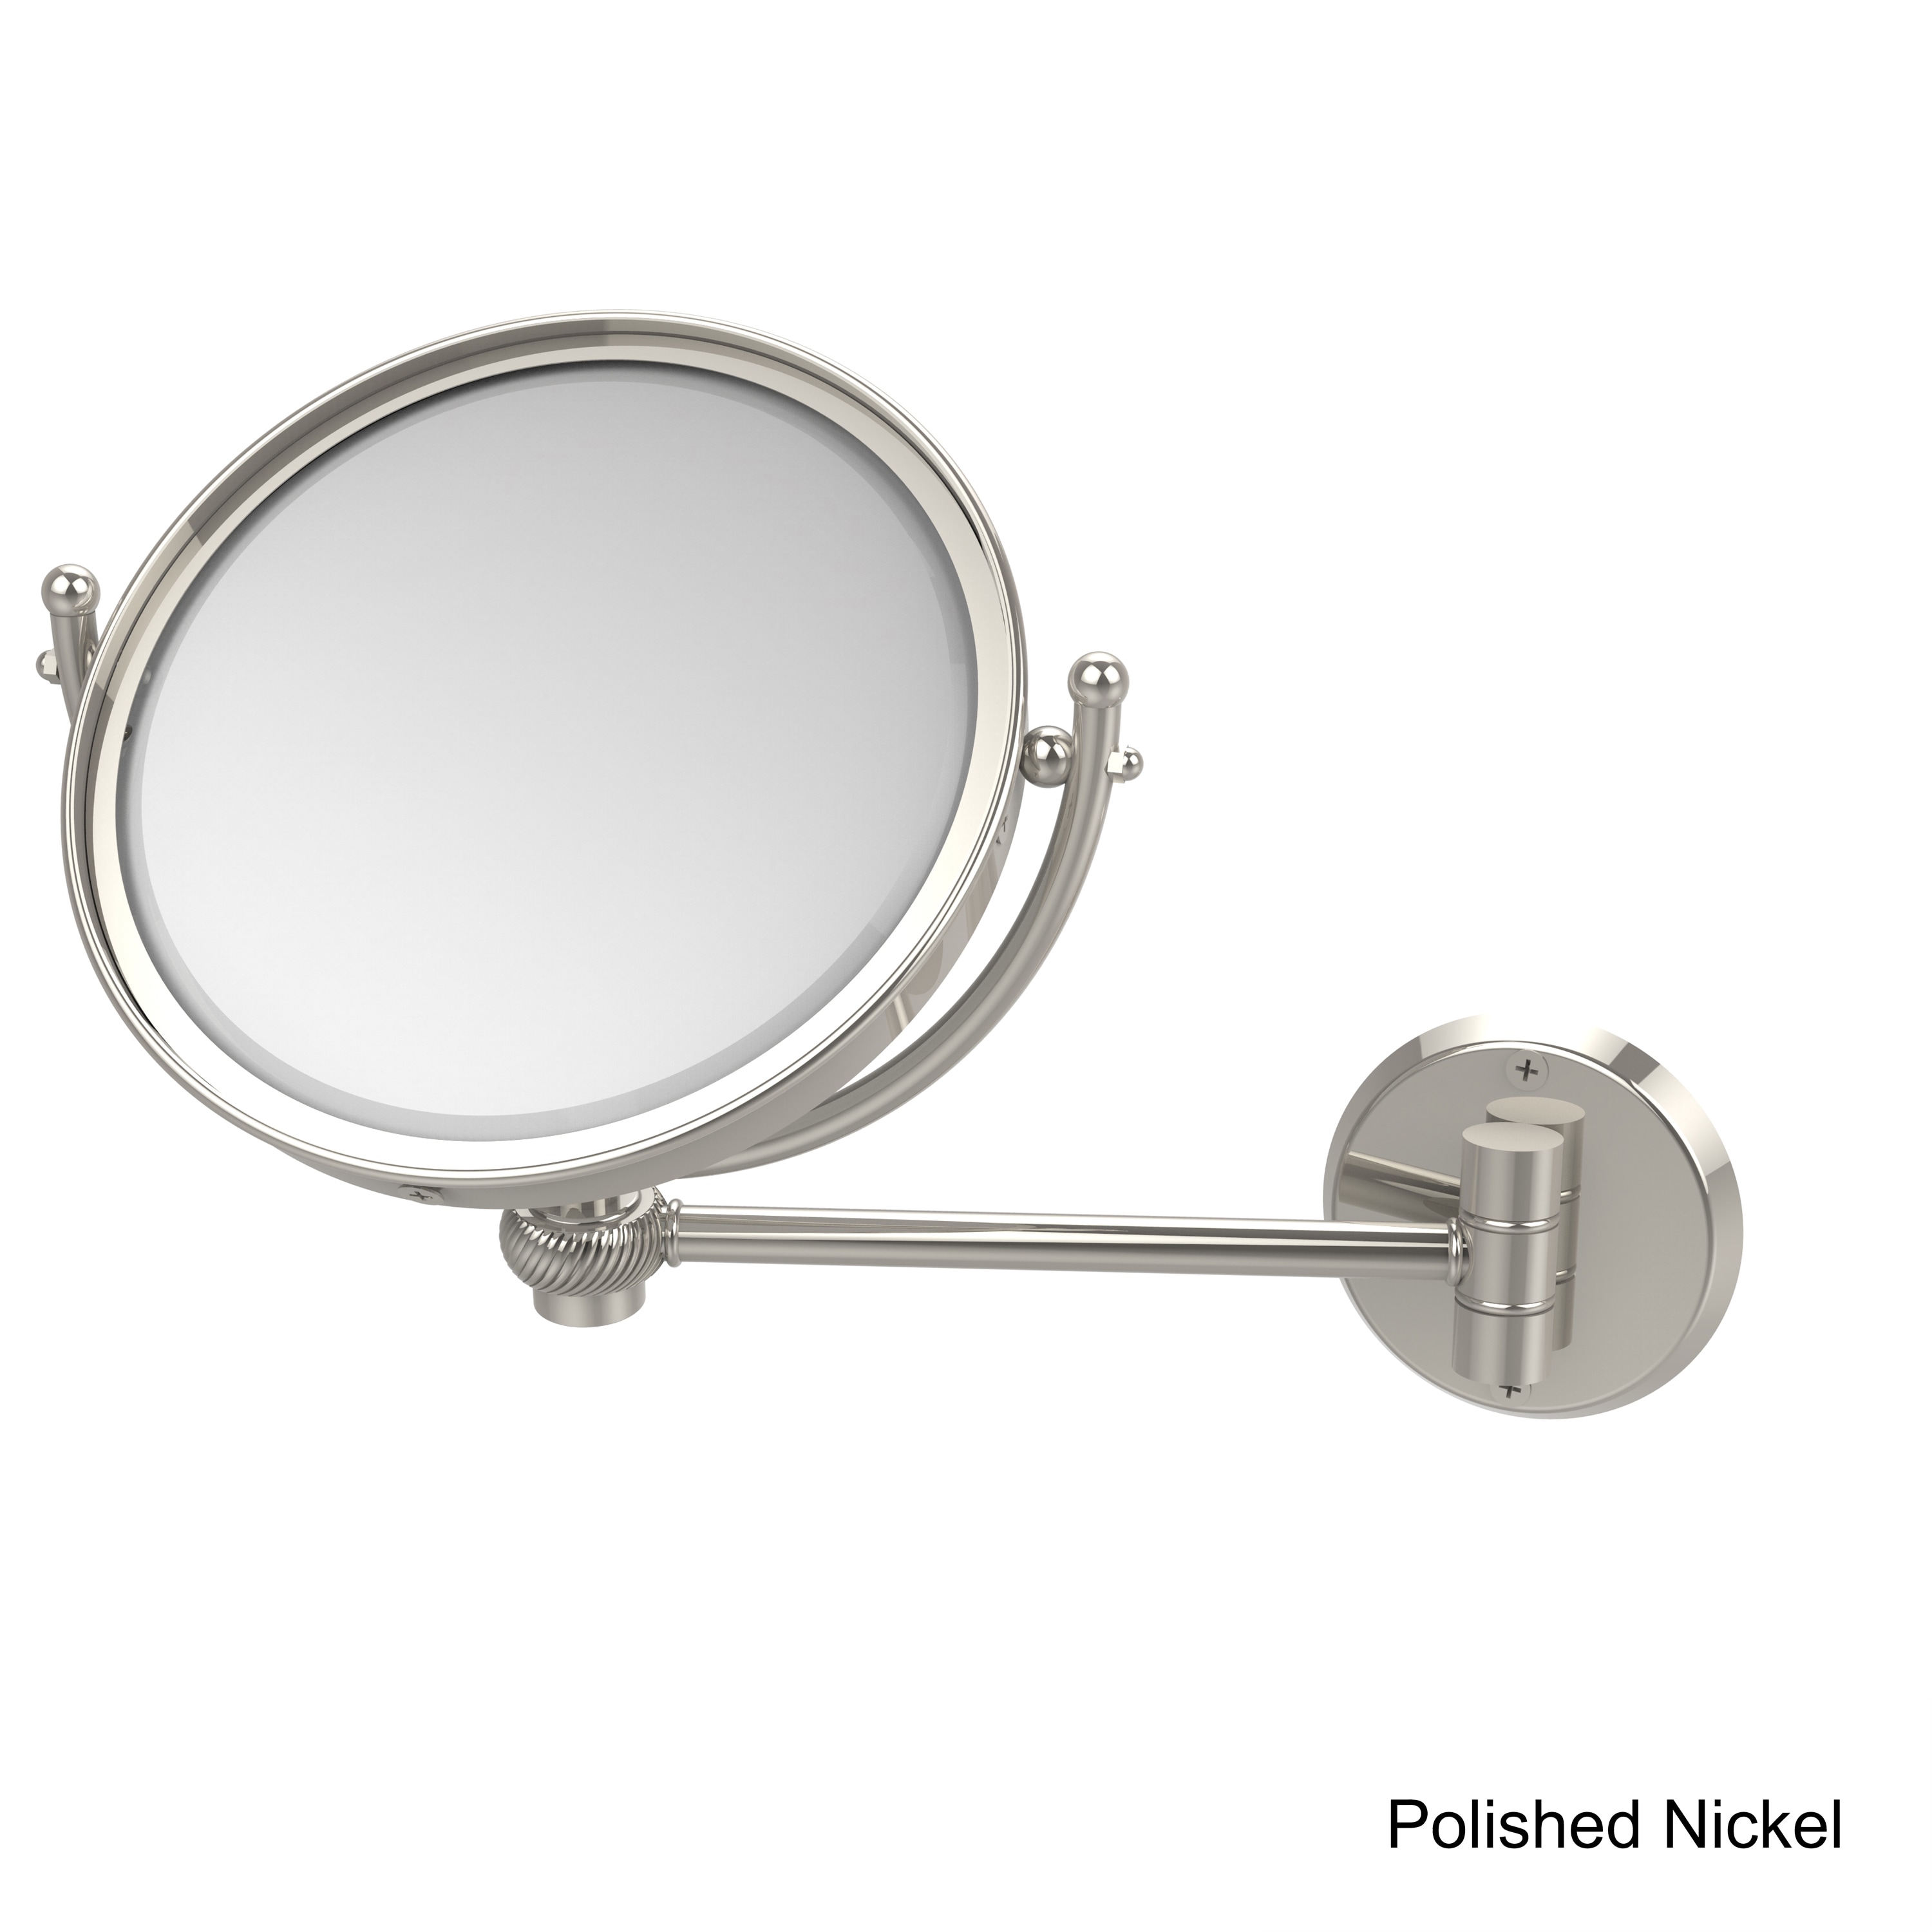 2-SIDED 7X MAKEUP GOLD 8" MAGNIFYING MIRROR FOR BATH WALL MOUNTED SWING ARM 